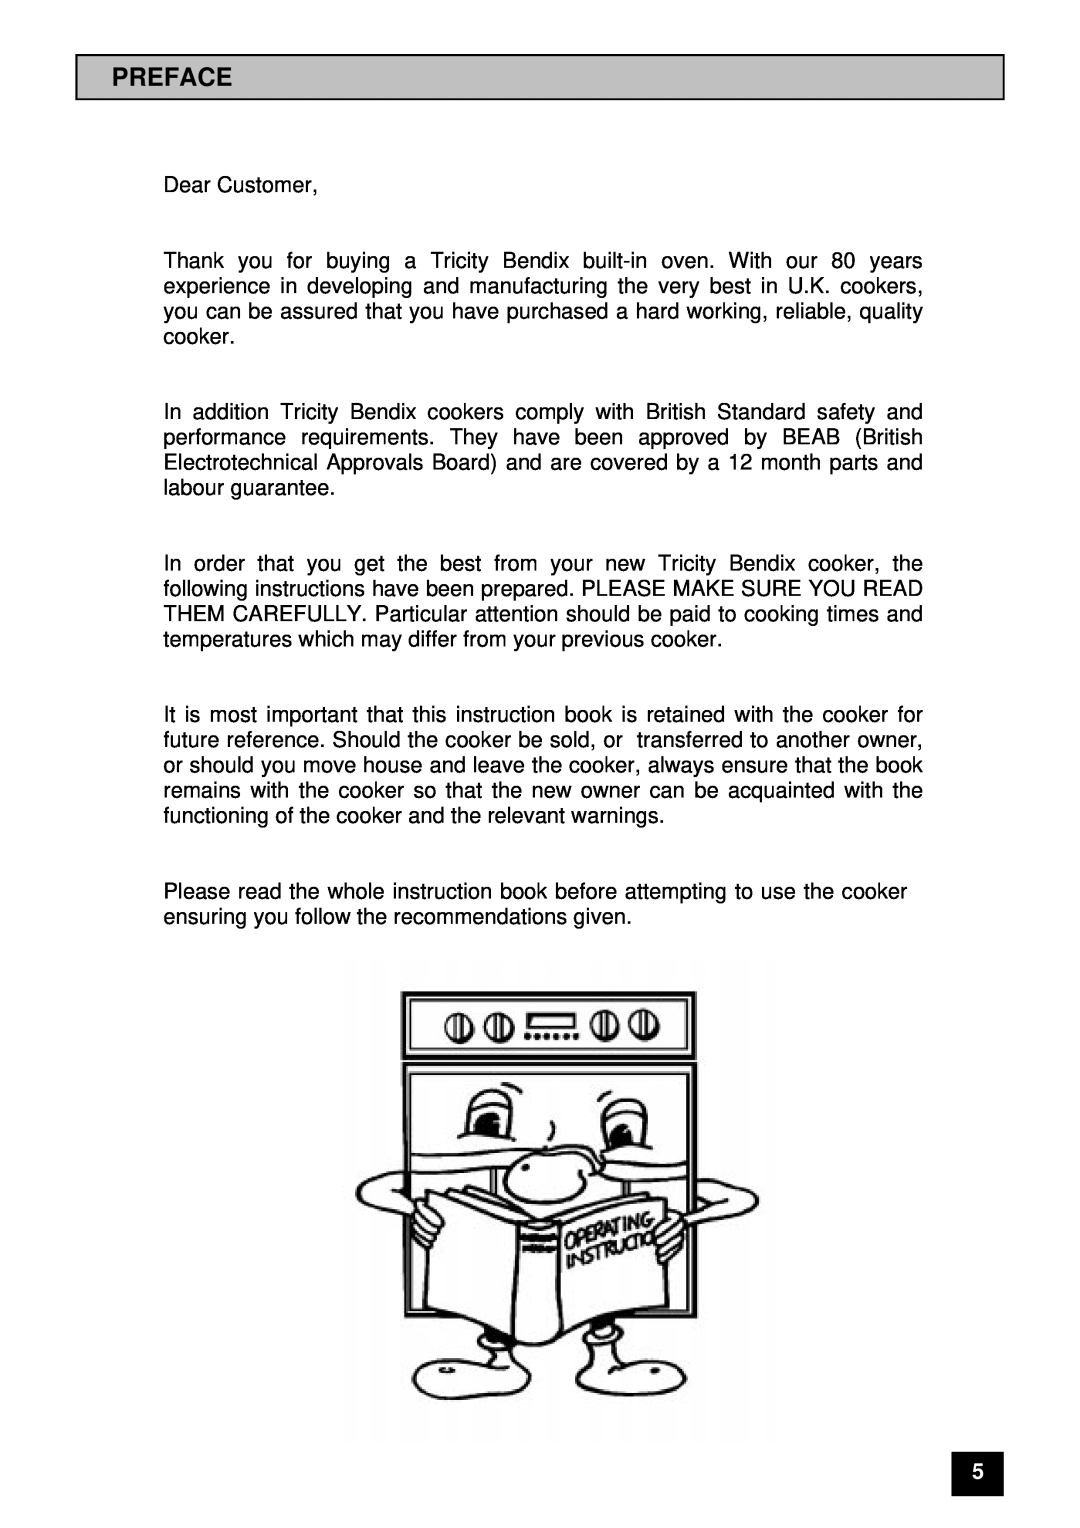 Tricity Bendix BS 615 SO installation instructions Preface 